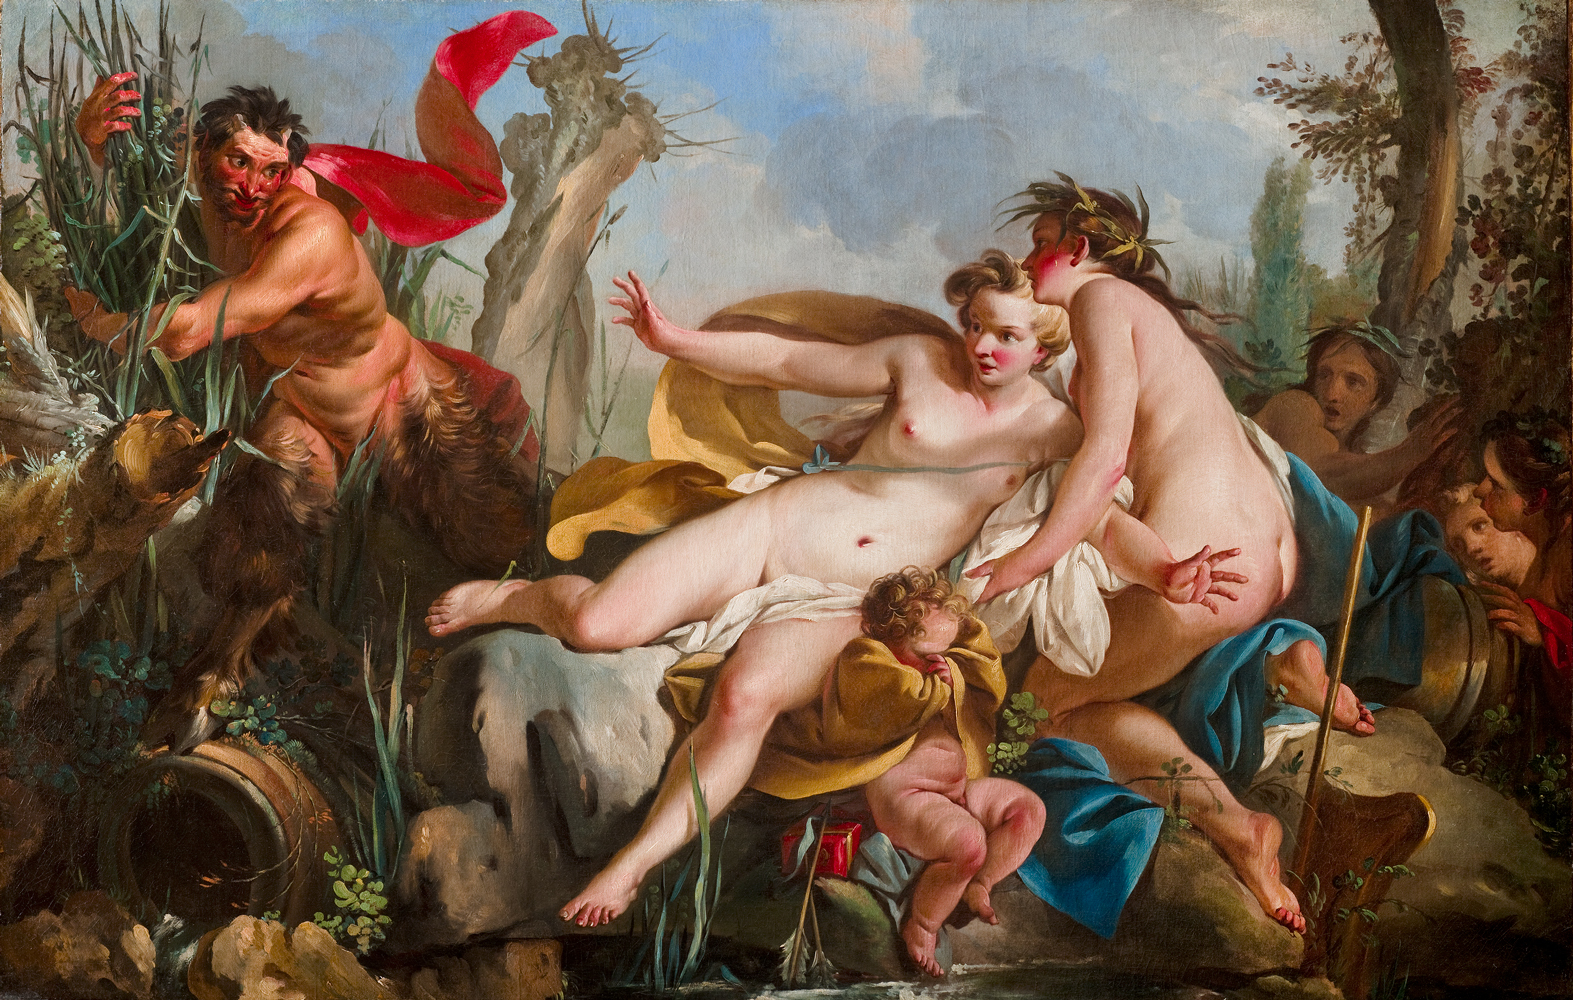 “Pan and Syrinx” by Jean-Baptiste-Marie Pierre is one of the 80 works on display as part of “Storytelling: French Art from The Horvitz Collection.” Courtesy image